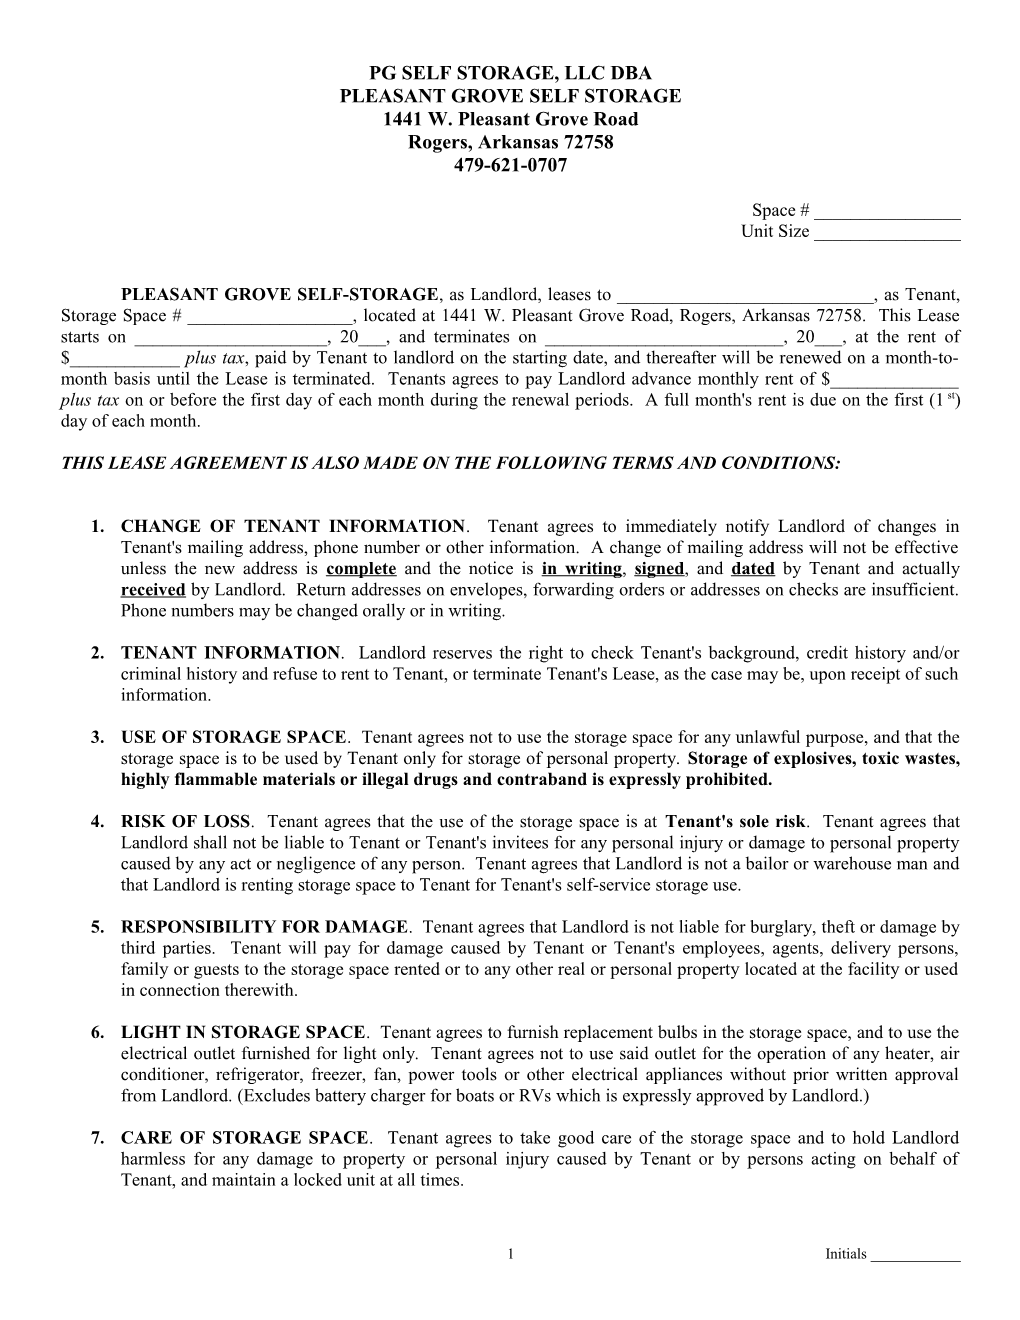 Sample Lease Agreement for Information Only